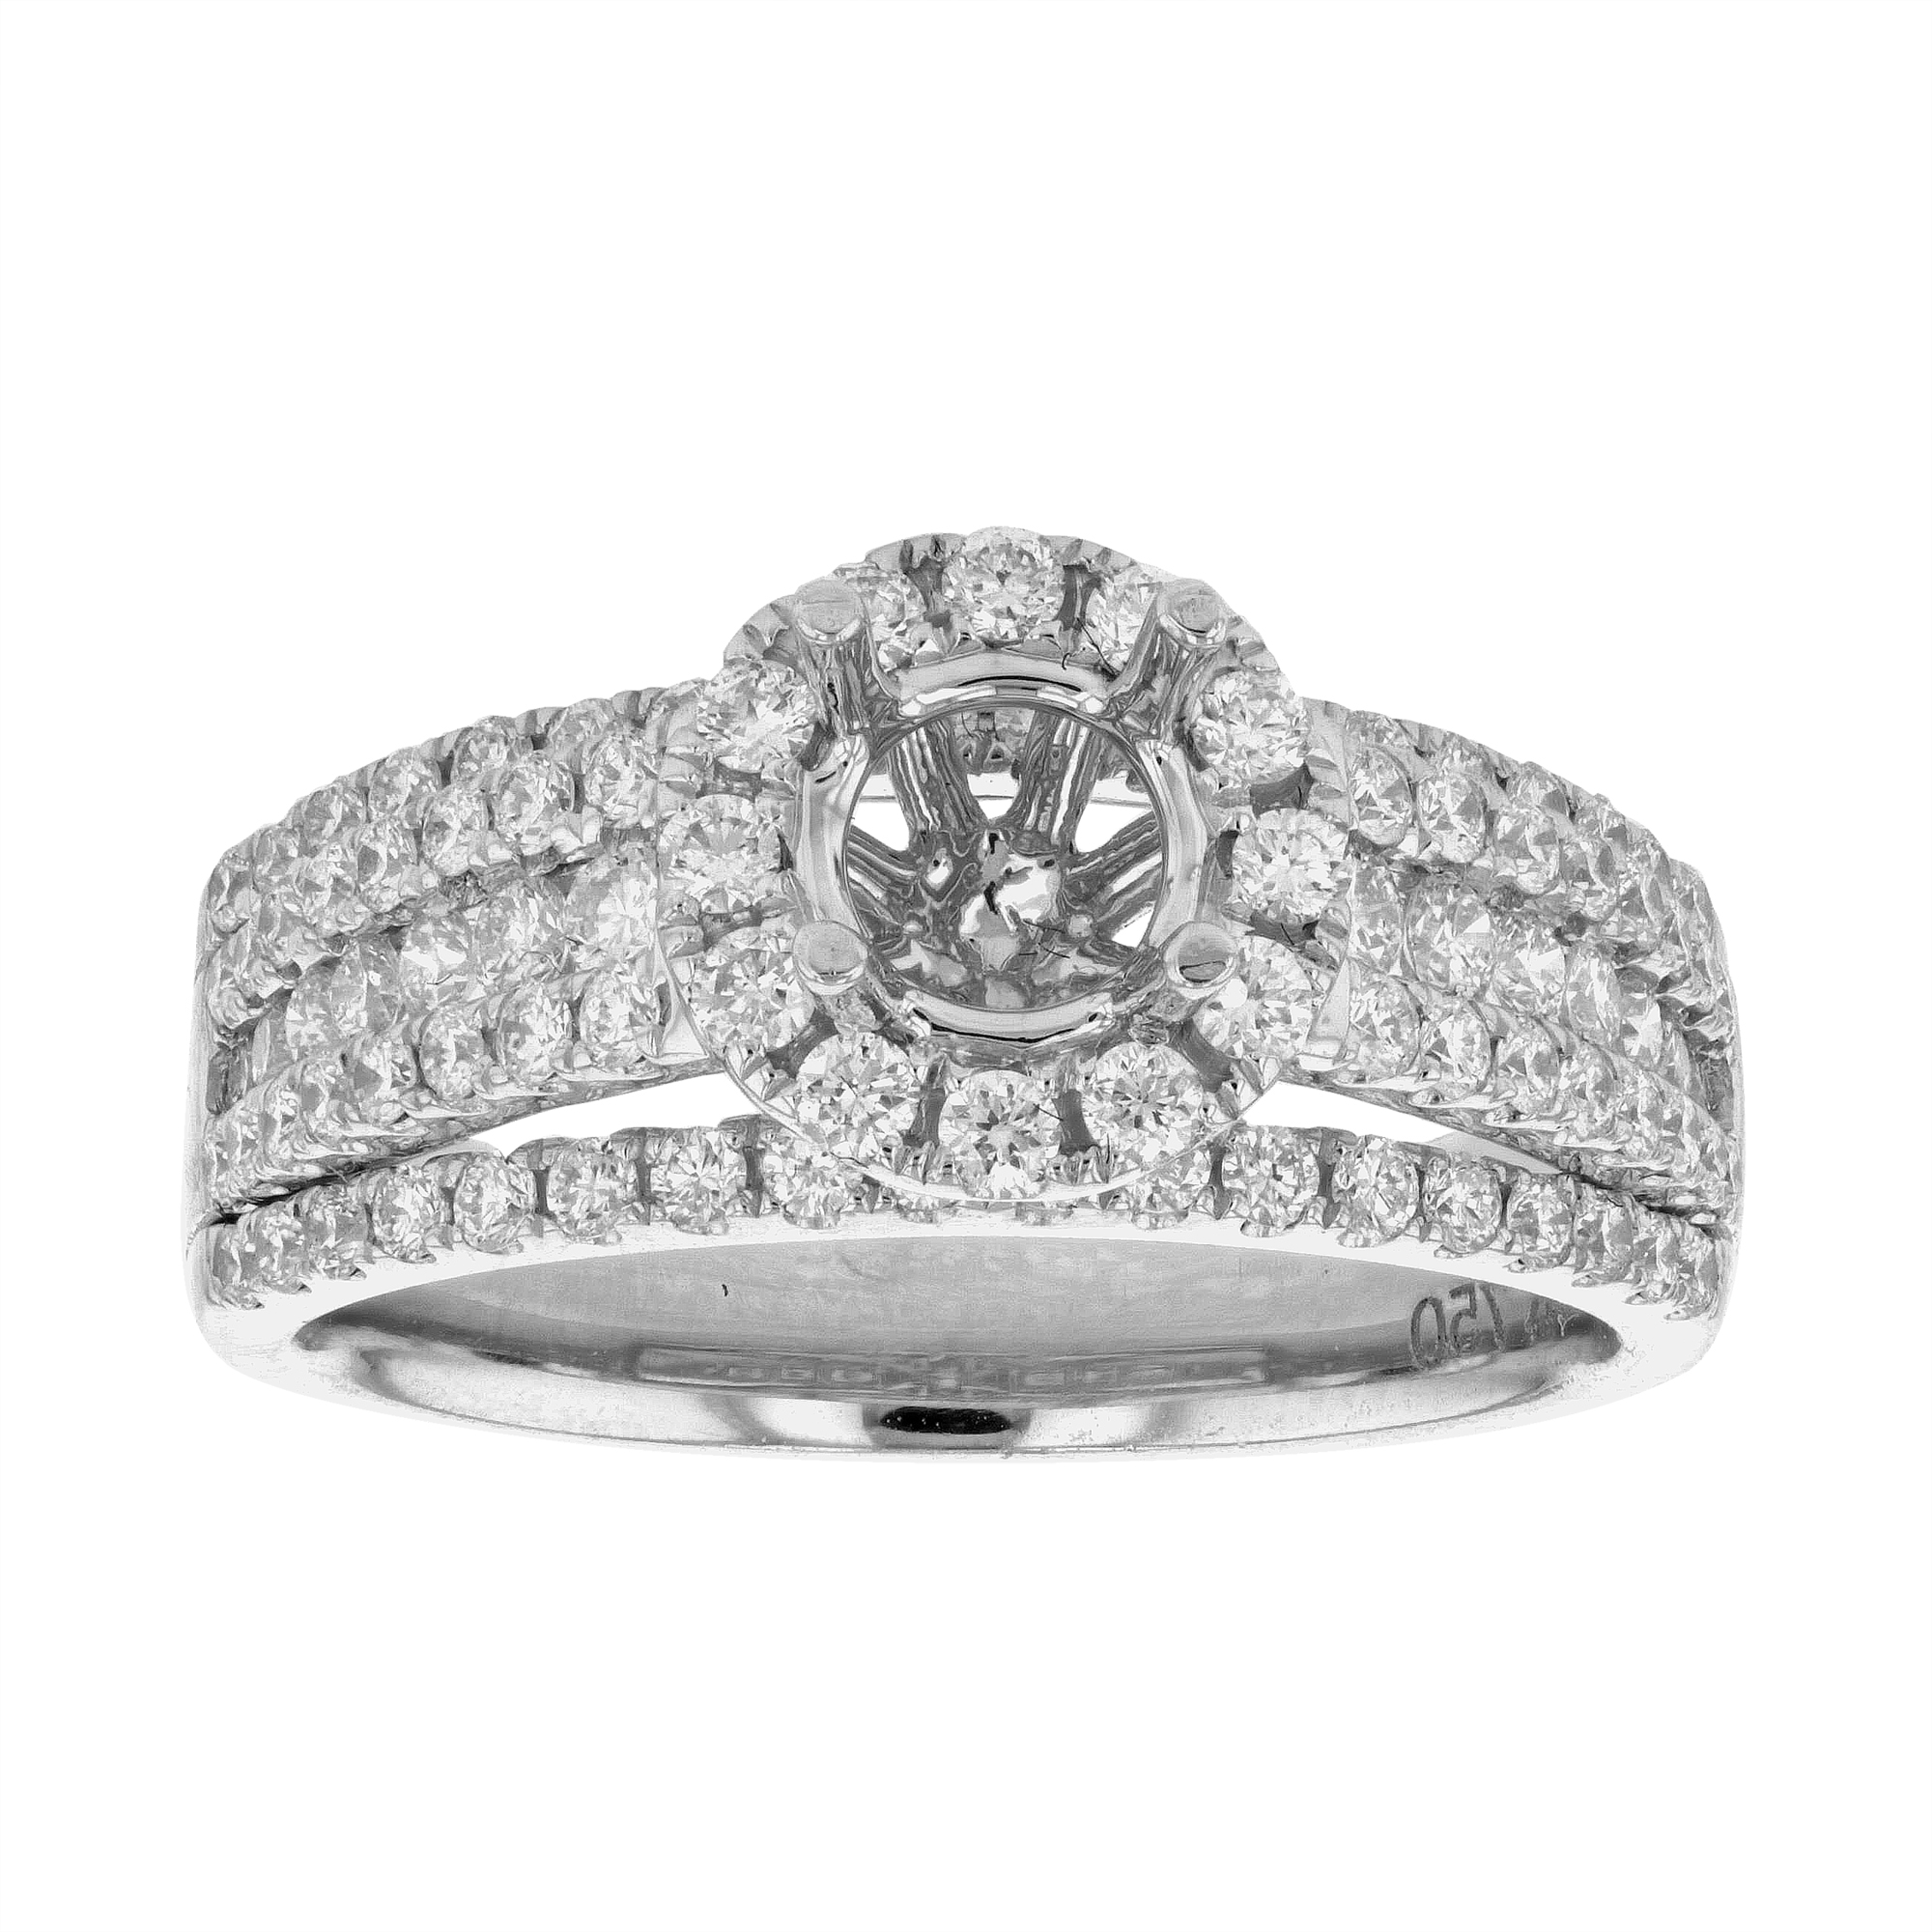 View 0.89ctw Diamond Semi Mount engagement Ring in 18k White Gold